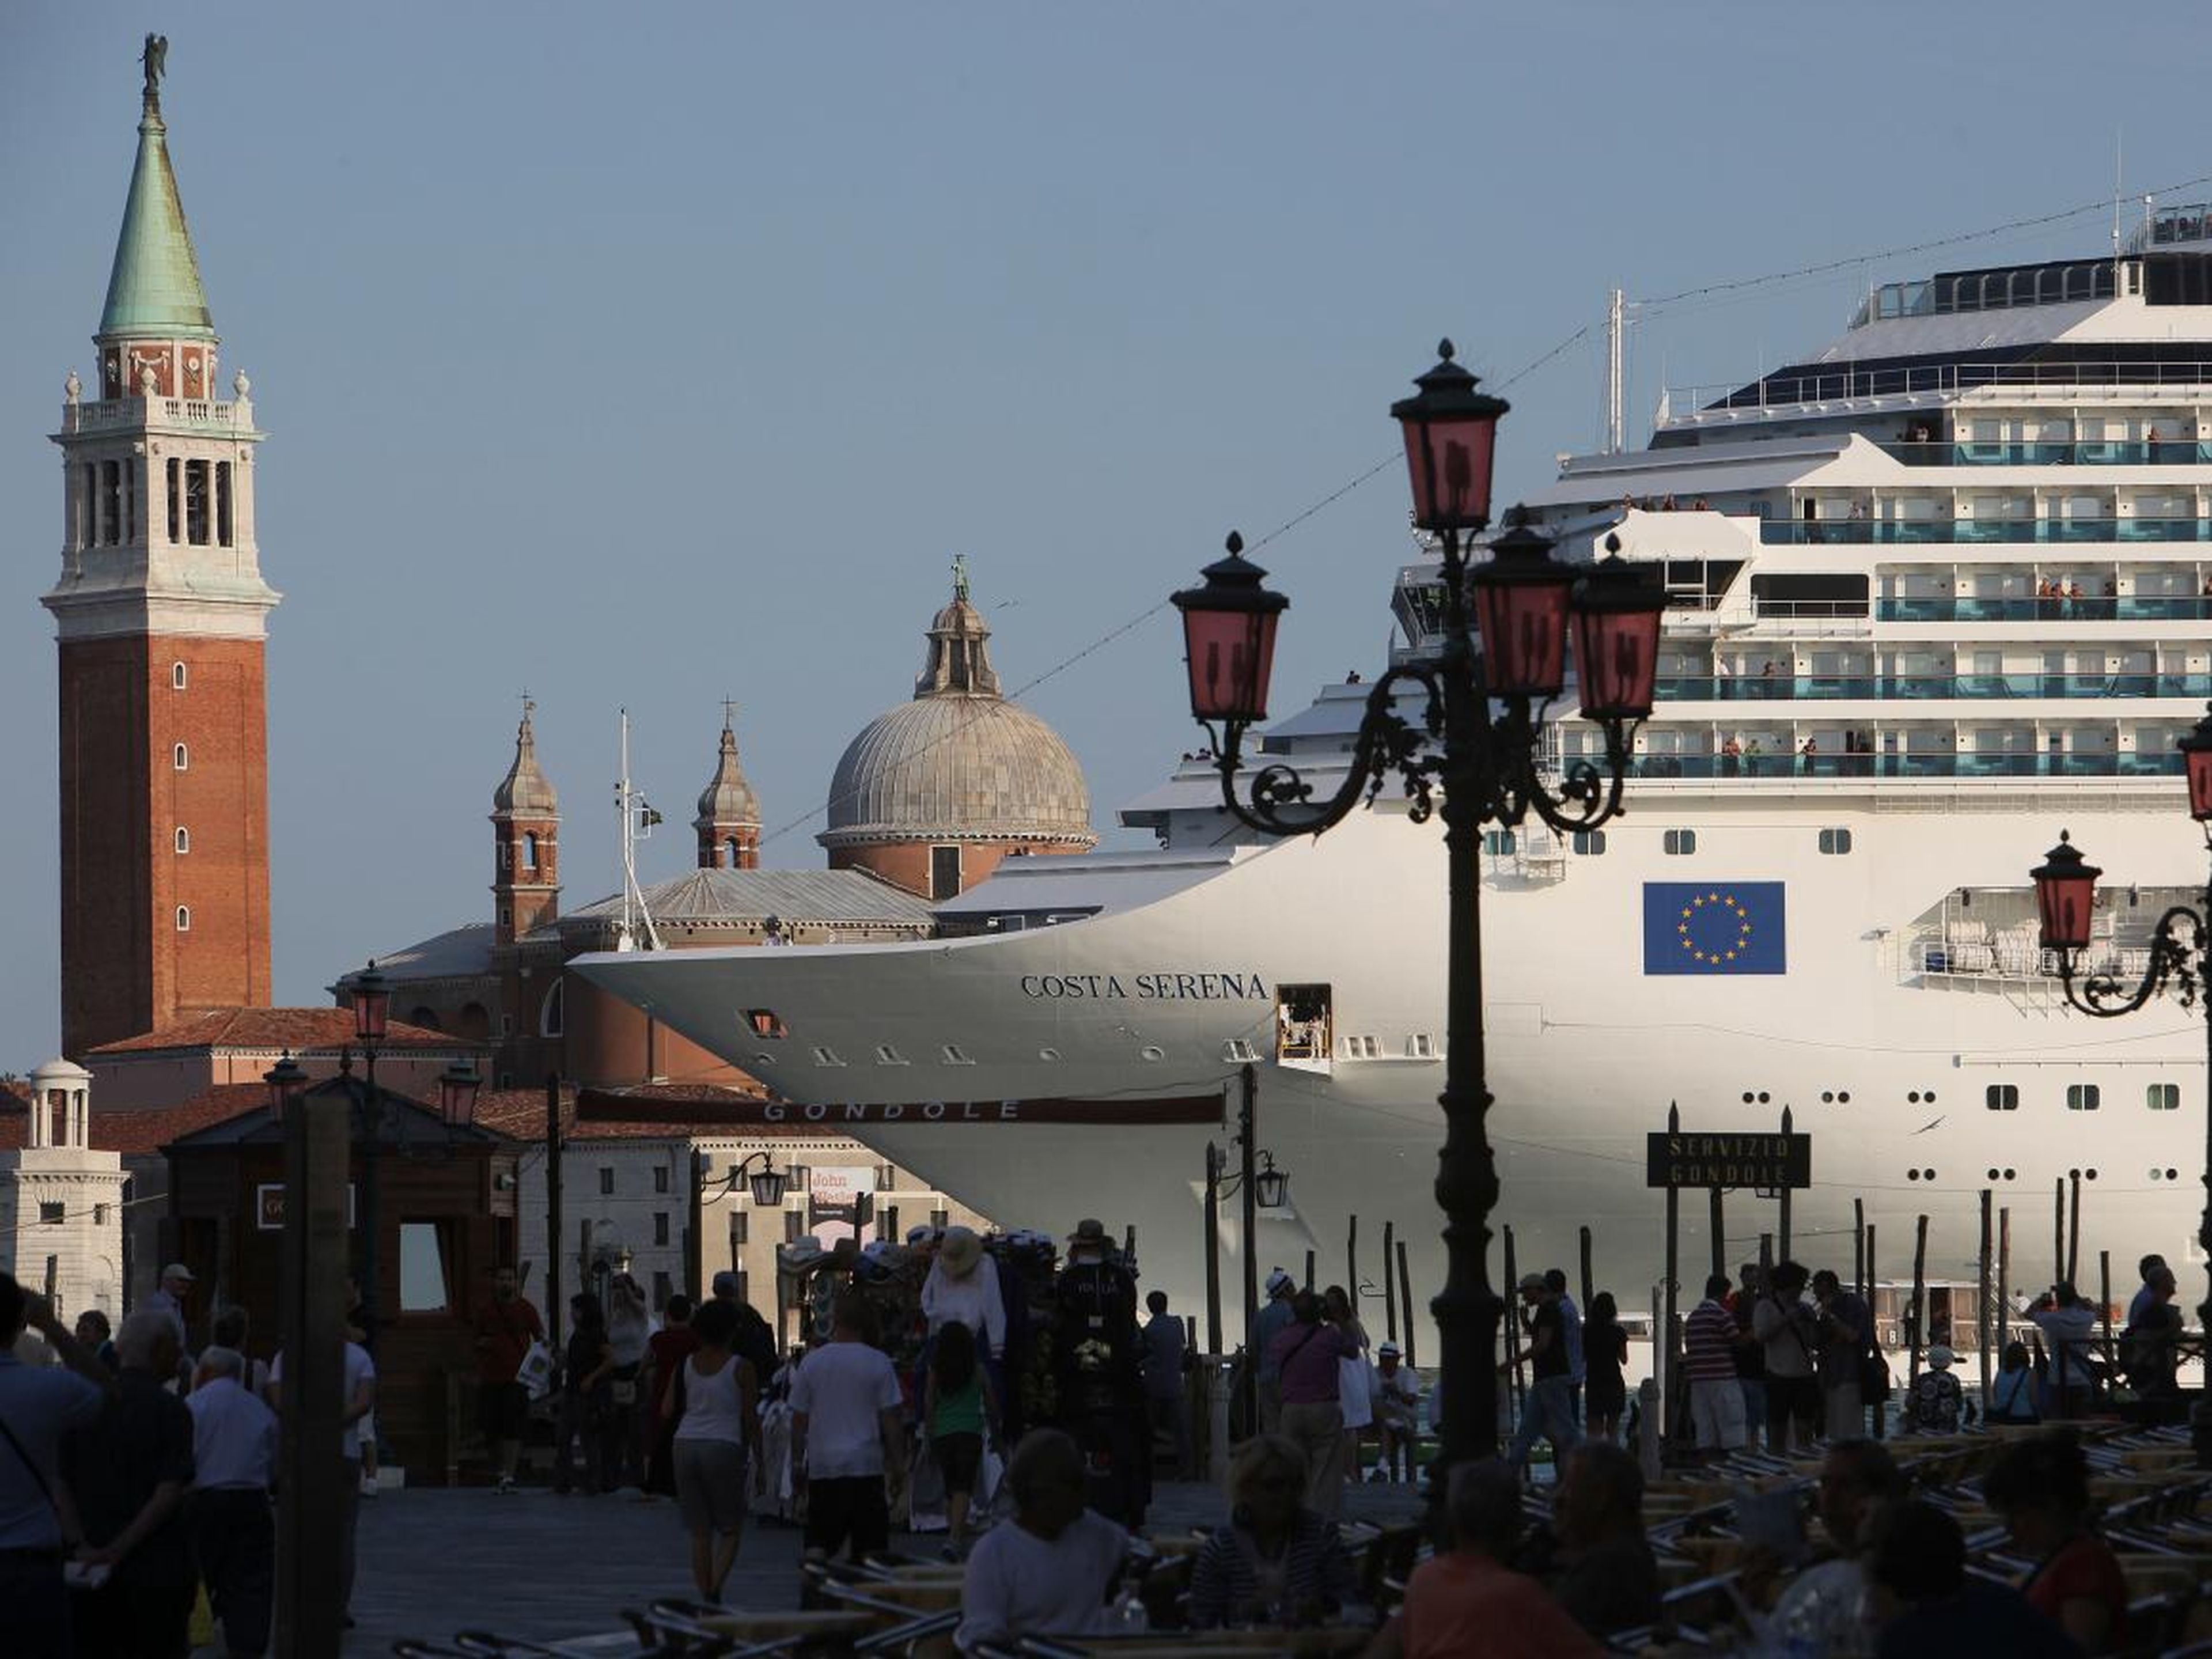 In November 2017, it was announced that Venice would block these cruise ships from passing through the Grand Canal by Venice's iconic square, Piazza San Marco.